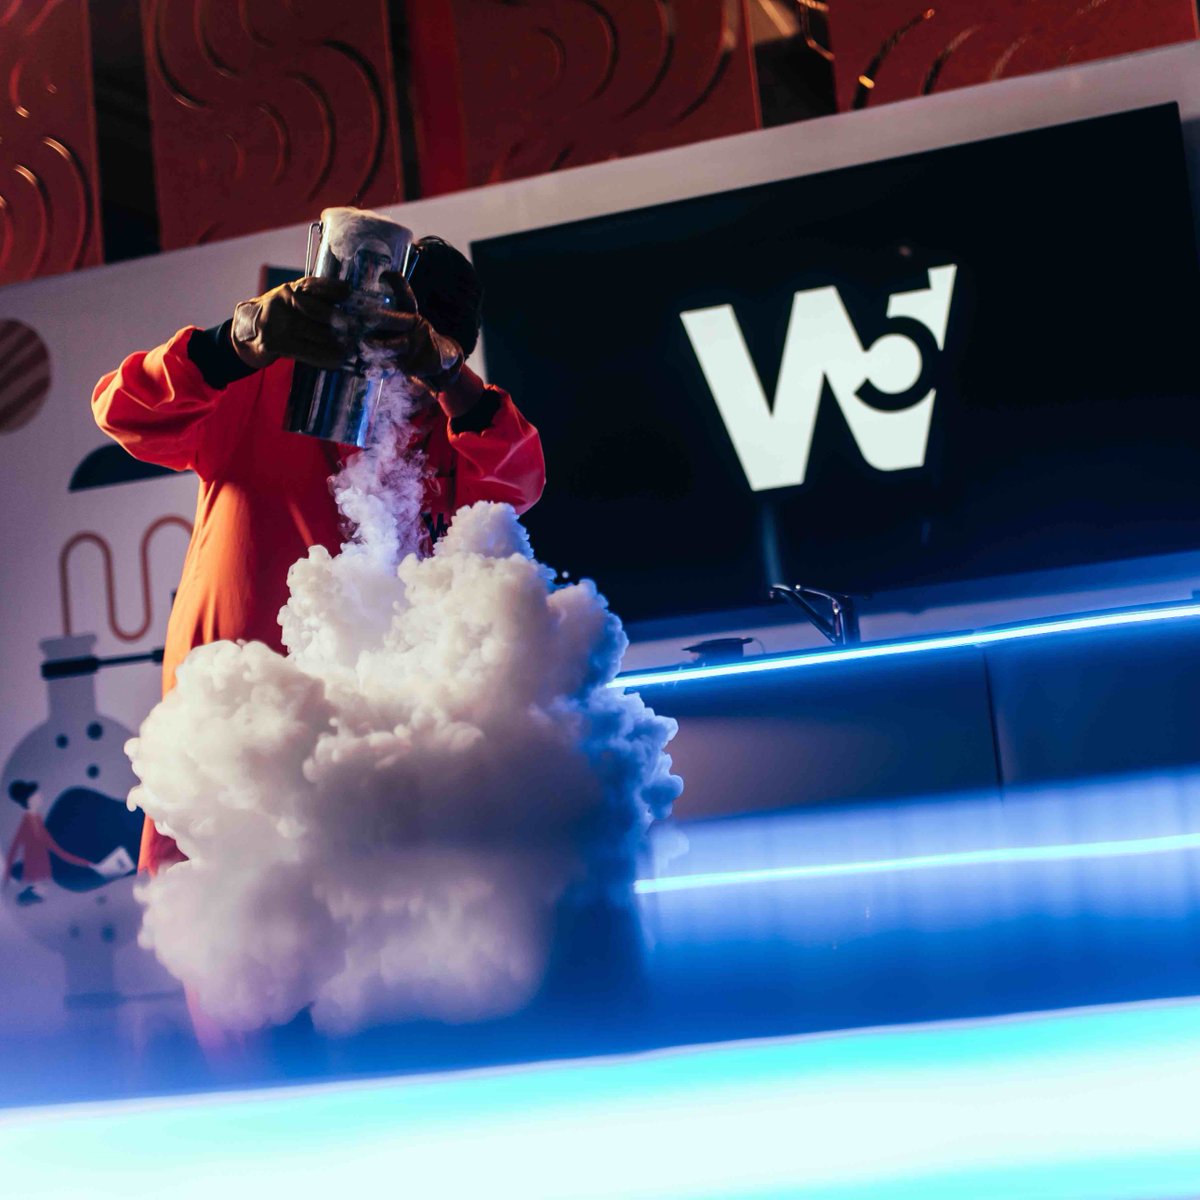 🔥 Explosive science shows ➕ over 2️⃣5️⃣0️⃣ hands-on exhibits = The perfect formula for a weekend of discovery! Launch a rocket, witness eureka moments with daily science shows, and so much more at W5! 🎉 🎟 Book your weekend of adventure NOW: bit.ly/BookNow-W5